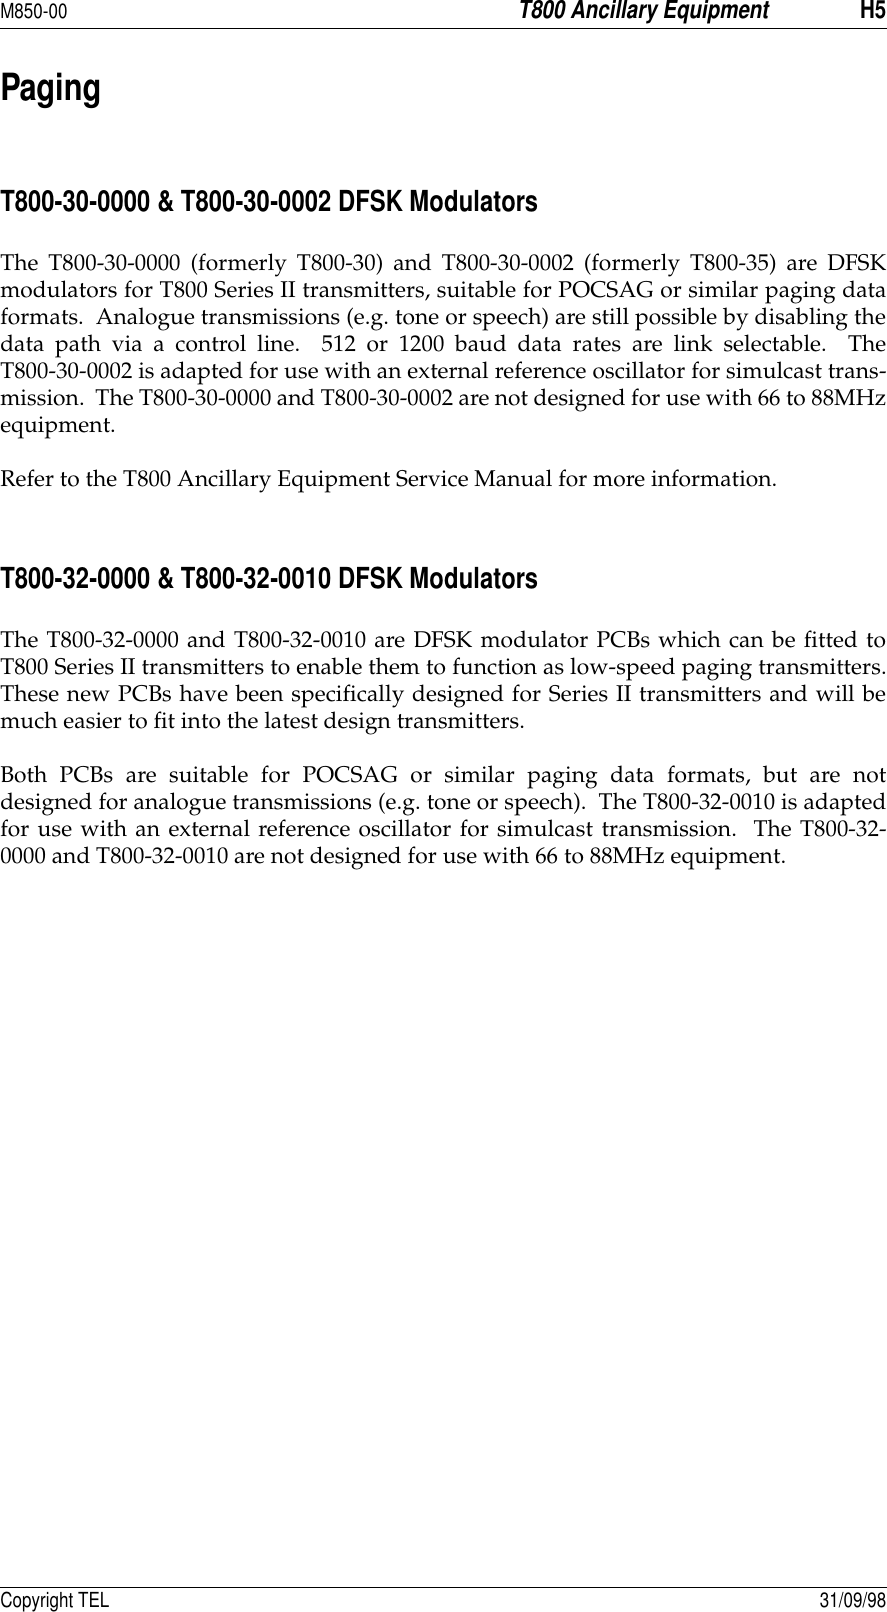 M850-00T800 Ancillary EquipmentH5Copyright TEL 31/09/98PagingT800-30-0000 &amp; T800-30-0002 DFSK ModulatorsThe T800-30-0000 (formerly T800-30) and T800-30-0002 (formerly T800-35) are DFSKmodulators for T800 Series II transmitters, suitable for POCSAG or similar paging dataformats.  Analogue transmissions (e.g. tone or speech) are still possible by disabling thedata path via a control line.  512 or 1200 baud data rates are link selectable.  TheT800-30-0002 is adapted for use with an external reference oscillator for simulcast trans-mission.  The T800-30-0000 and T800-30-0002 are not designed for use with 66 to 88MHzequipment.Refer to the T800 Ancillary Equipment Service Manual for more information.T800-32-0000 &amp; T800-32-0010 DFSK ModulatorsThe T800-32-0000 and T800-32-0010 are DFSK modulator PCBs which can be fitted toT800 Series II transmitters to enable them to function as low-speed paging transmitters.These new PCBs have been specifically designed for Series II transmitters and will bemuch easier to fit into the latest design transmitters.Both PCBs are suitable for POCSAG or similar paging data formats, but are notdesigned for analogue transmissions (e.g. tone or speech).  The T800-32-0010 is adaptedfor use with an external reference oscillator for simulcast transmission.  The T800-32-0000 and T800-32-0010 are not designed for use with 66 to 88MHz equipment.